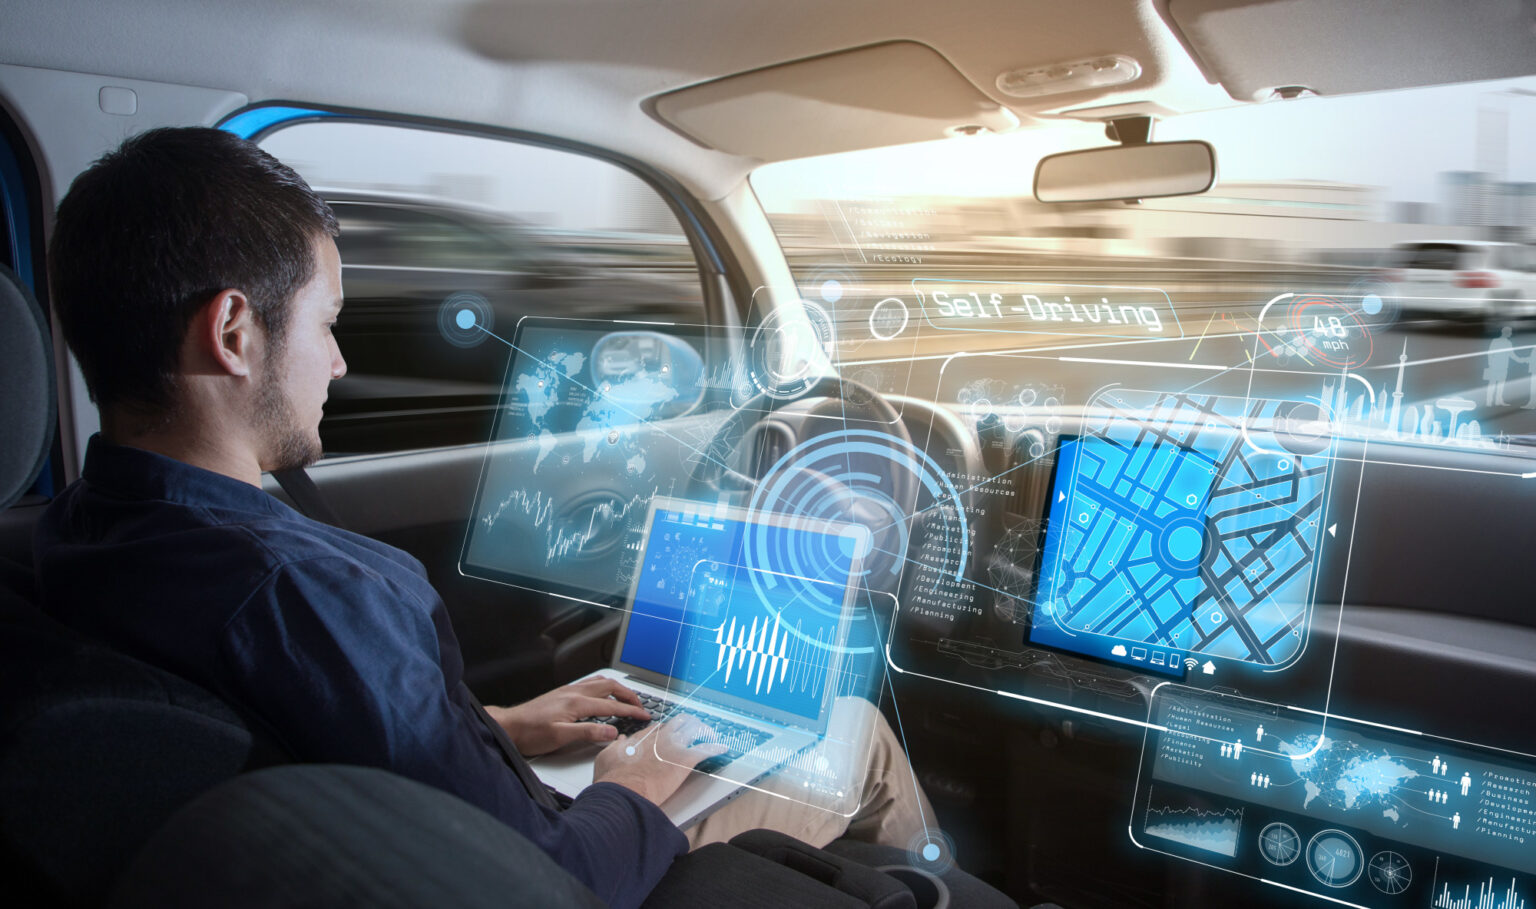 Imagine your car being a treasure trove of secrets about you! Here's why AI may be the thing that unexpectedly kidnaps you.